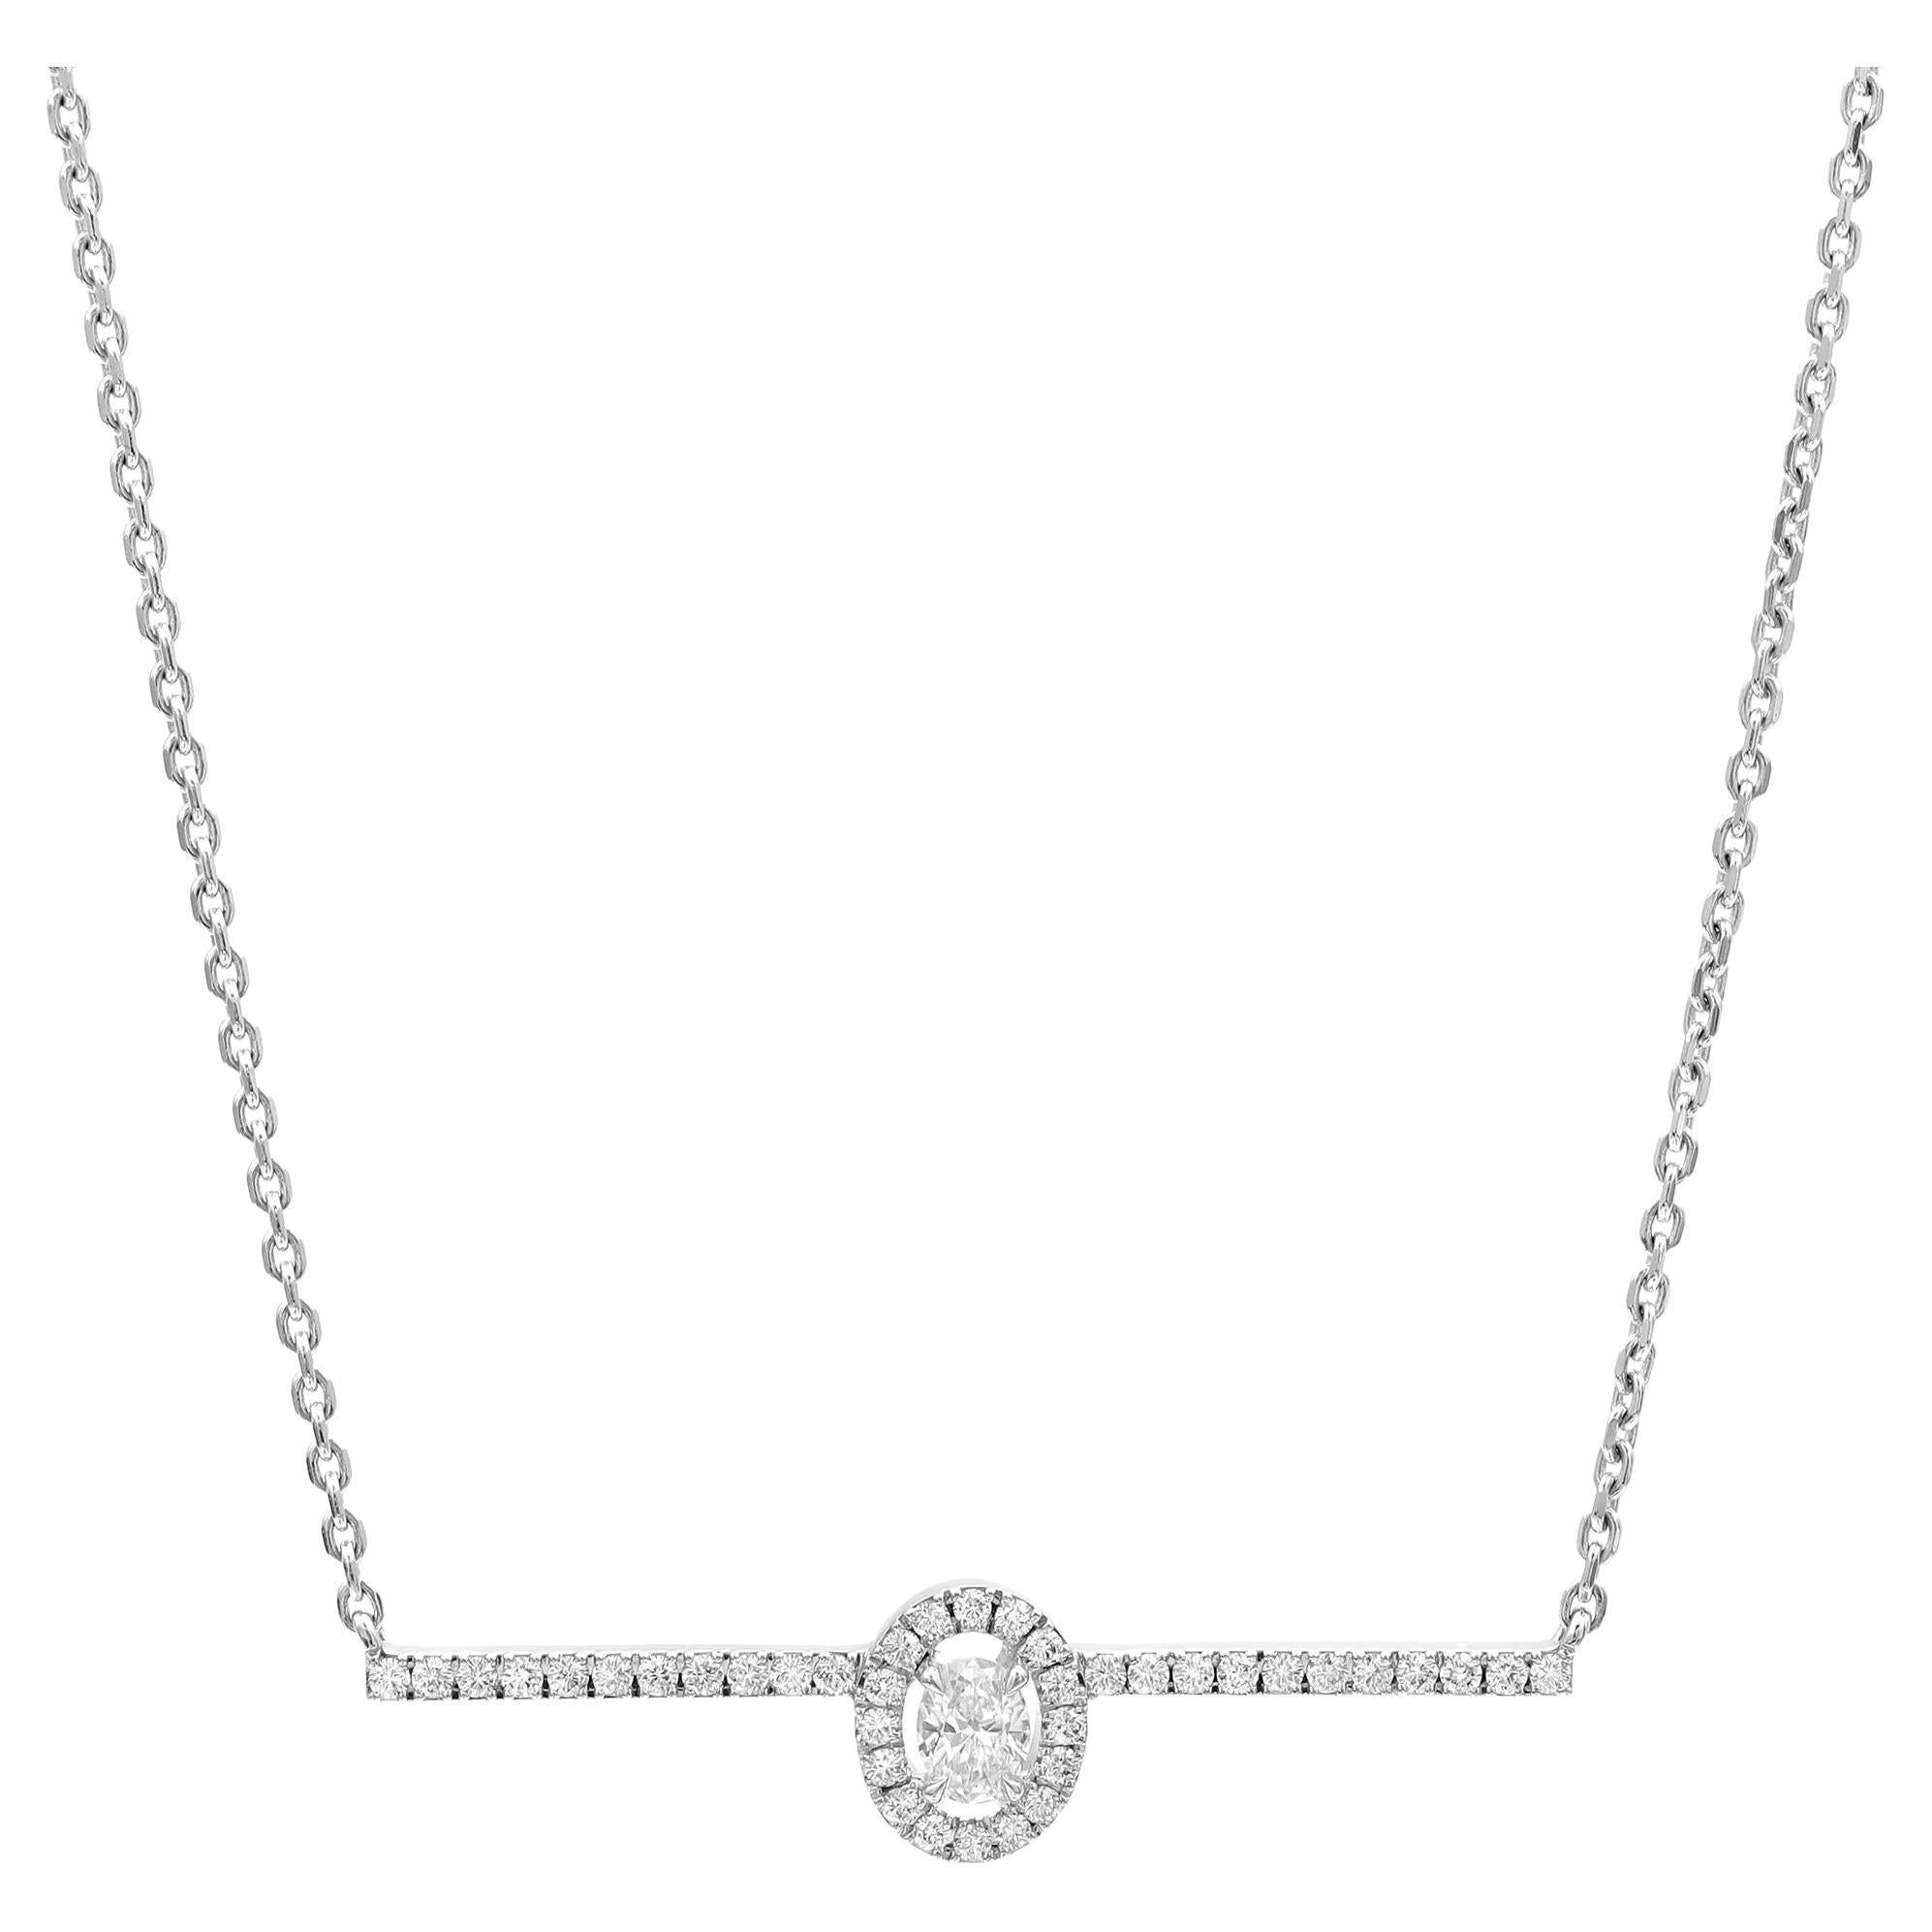 Messika 0.36Cttw Glam'Azone Diamond Chain Necklace 18K White Gold 18.5 Inches 